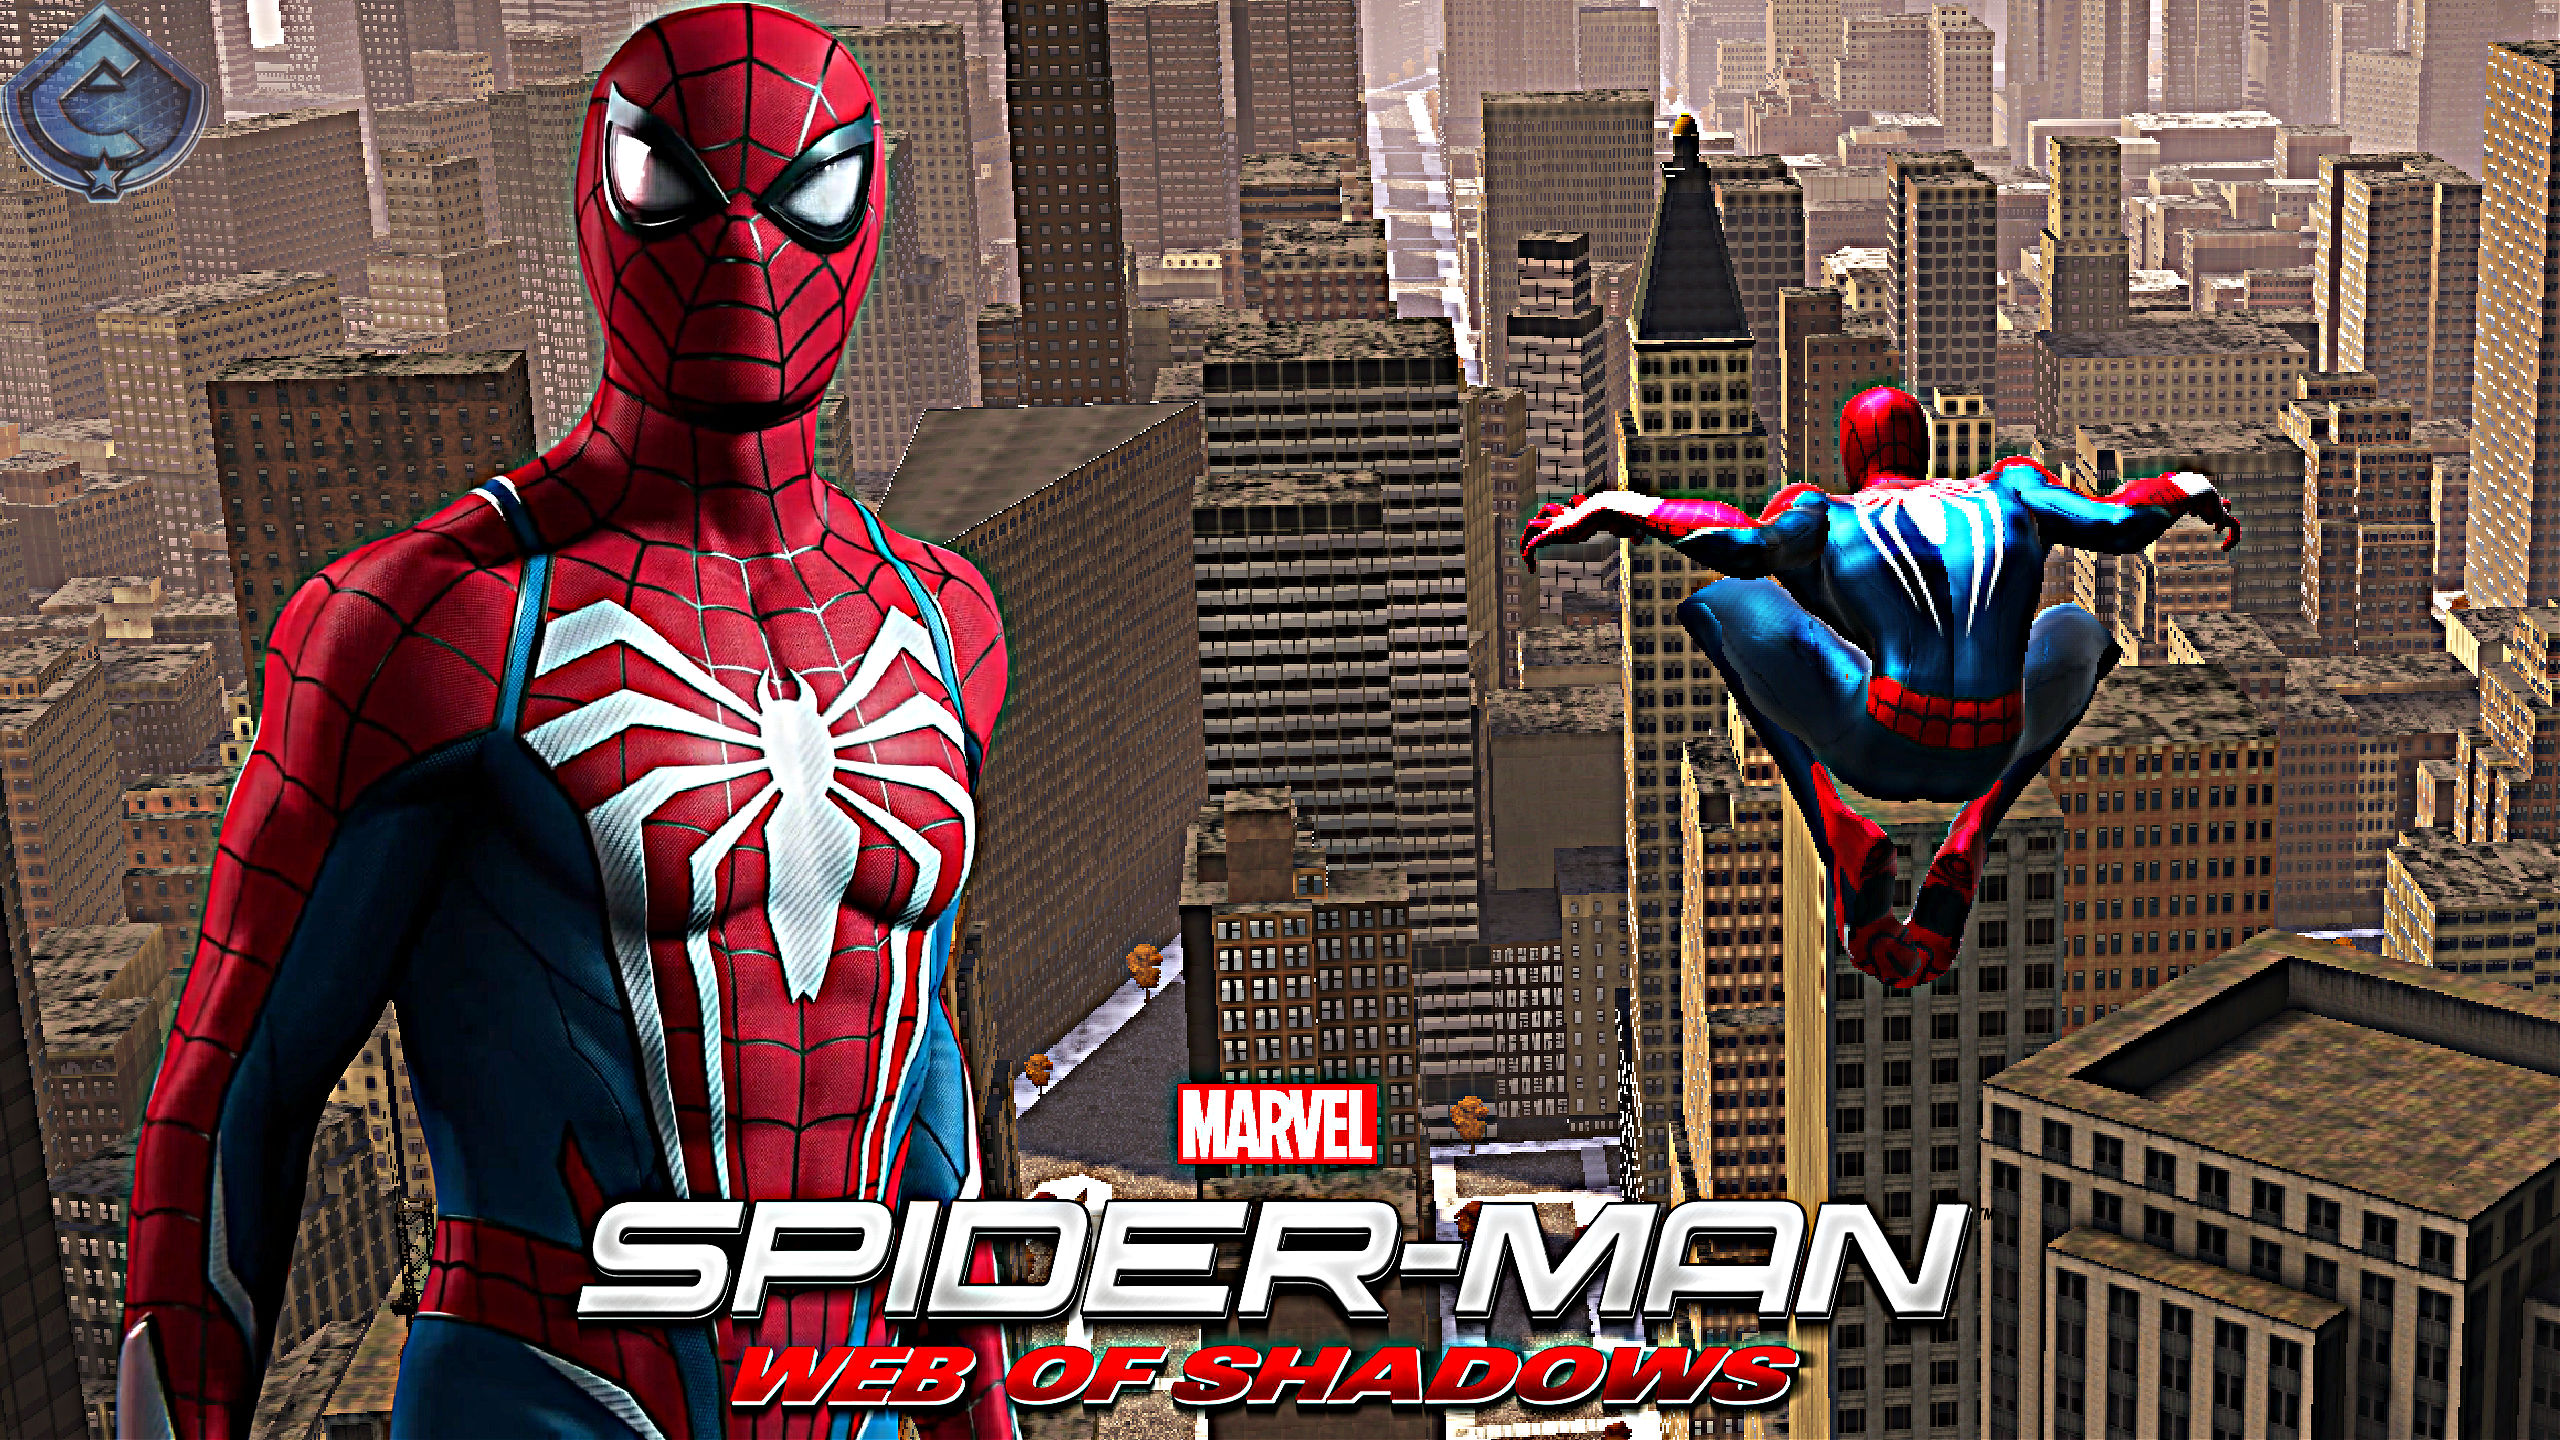 Image 2 - Spider-Man: Web Of Shadows Mods for Spider-Man: Web Of